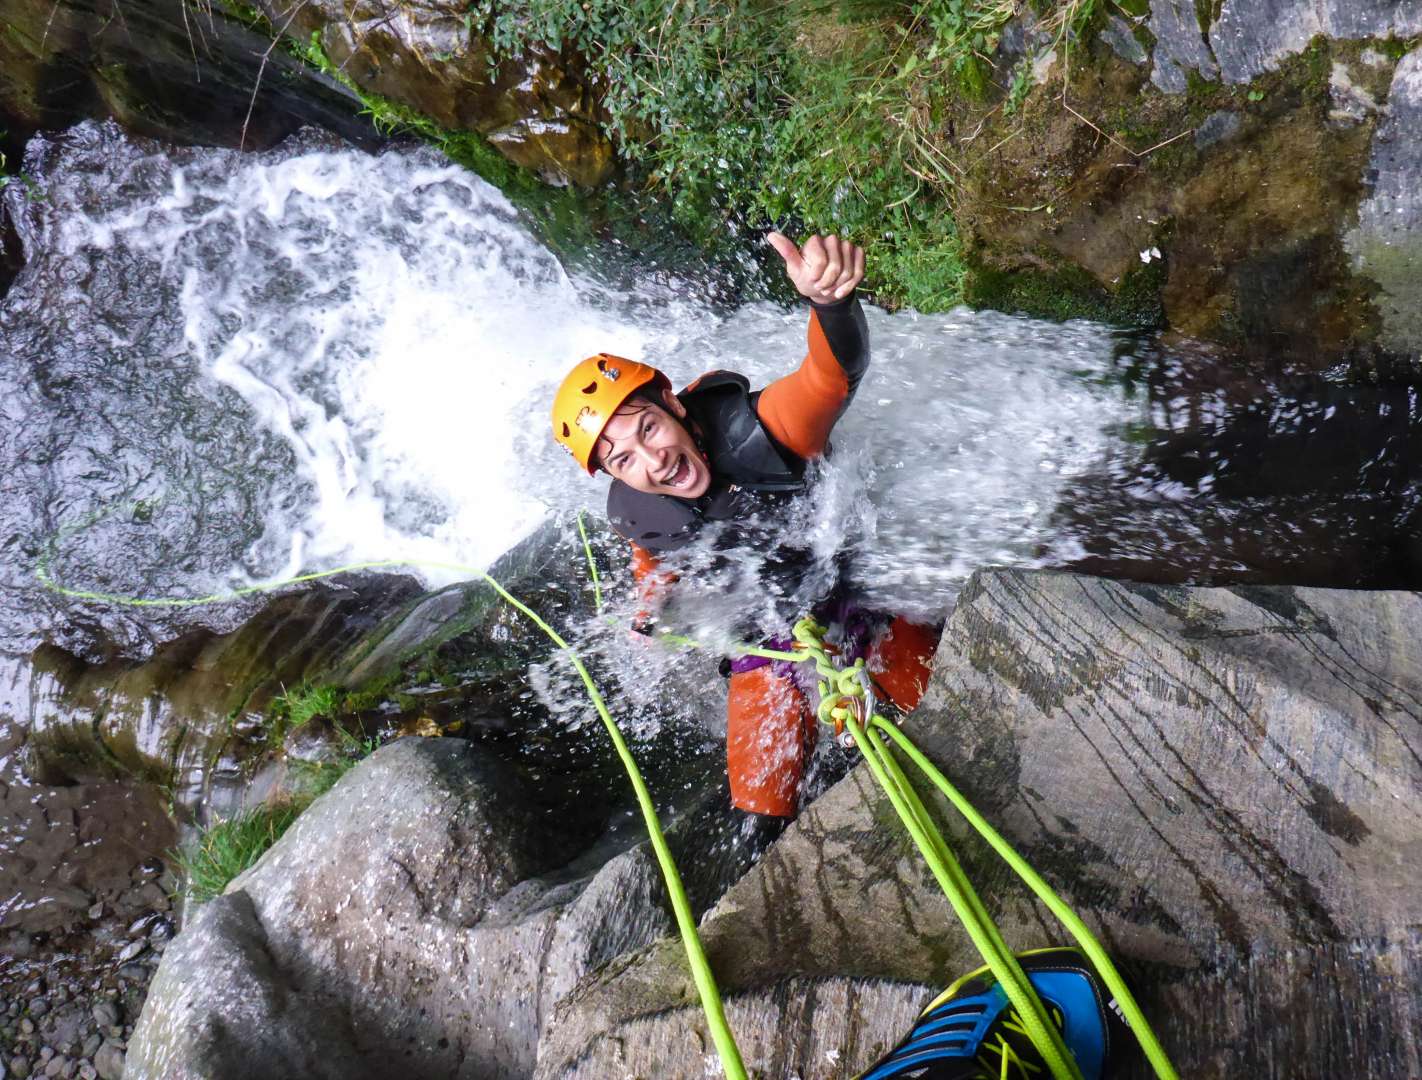 Gibbston Valley tour is an awesome introduction to the sport of canyoning